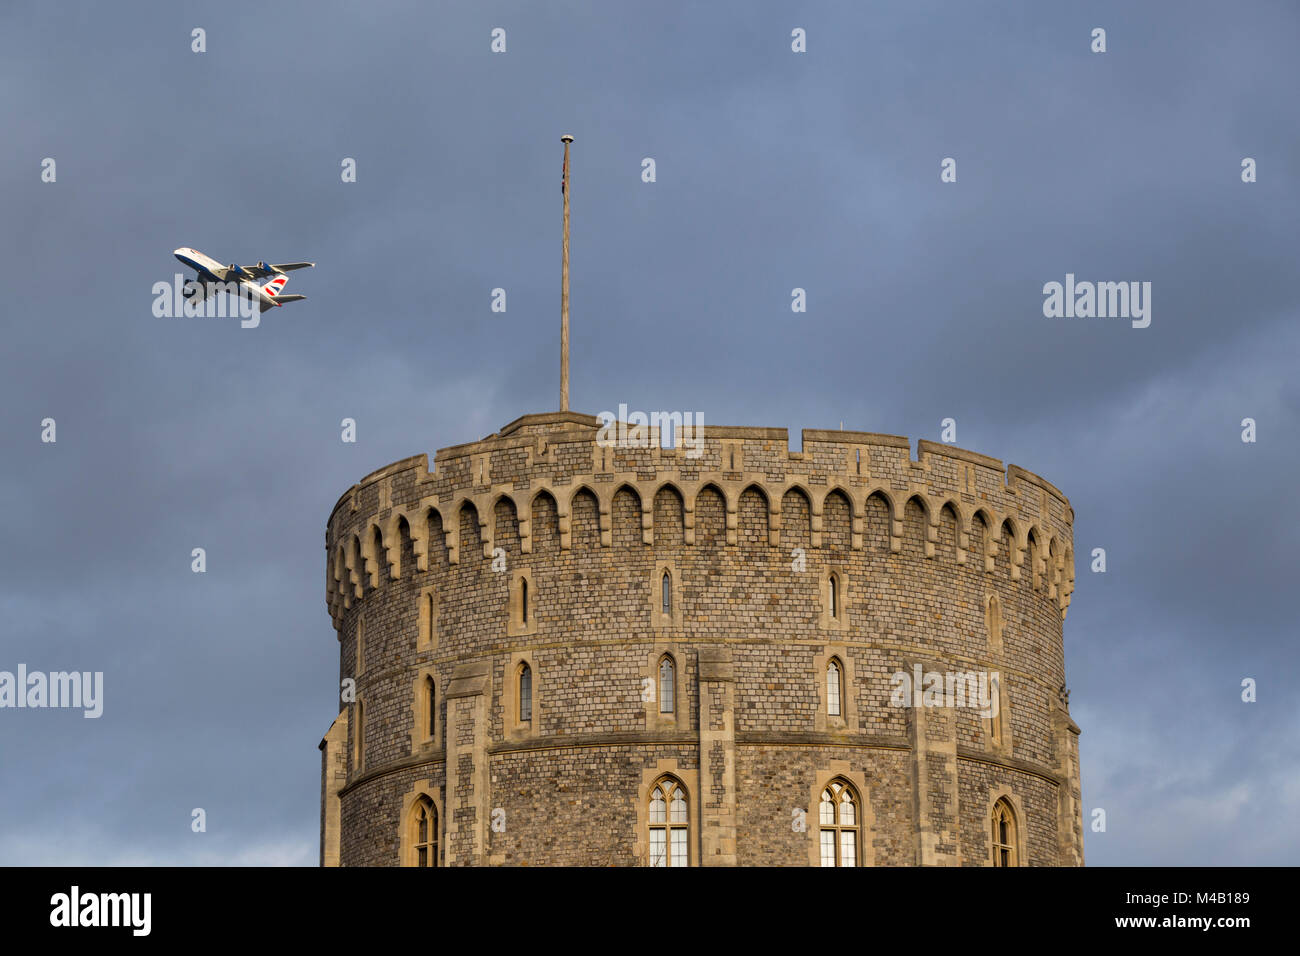 BA A380 Aircraft / aeroplane / air plane / flight from Heathrow airport passing over the round tower of Windsor Castle while climbing after take off. Stock Photo